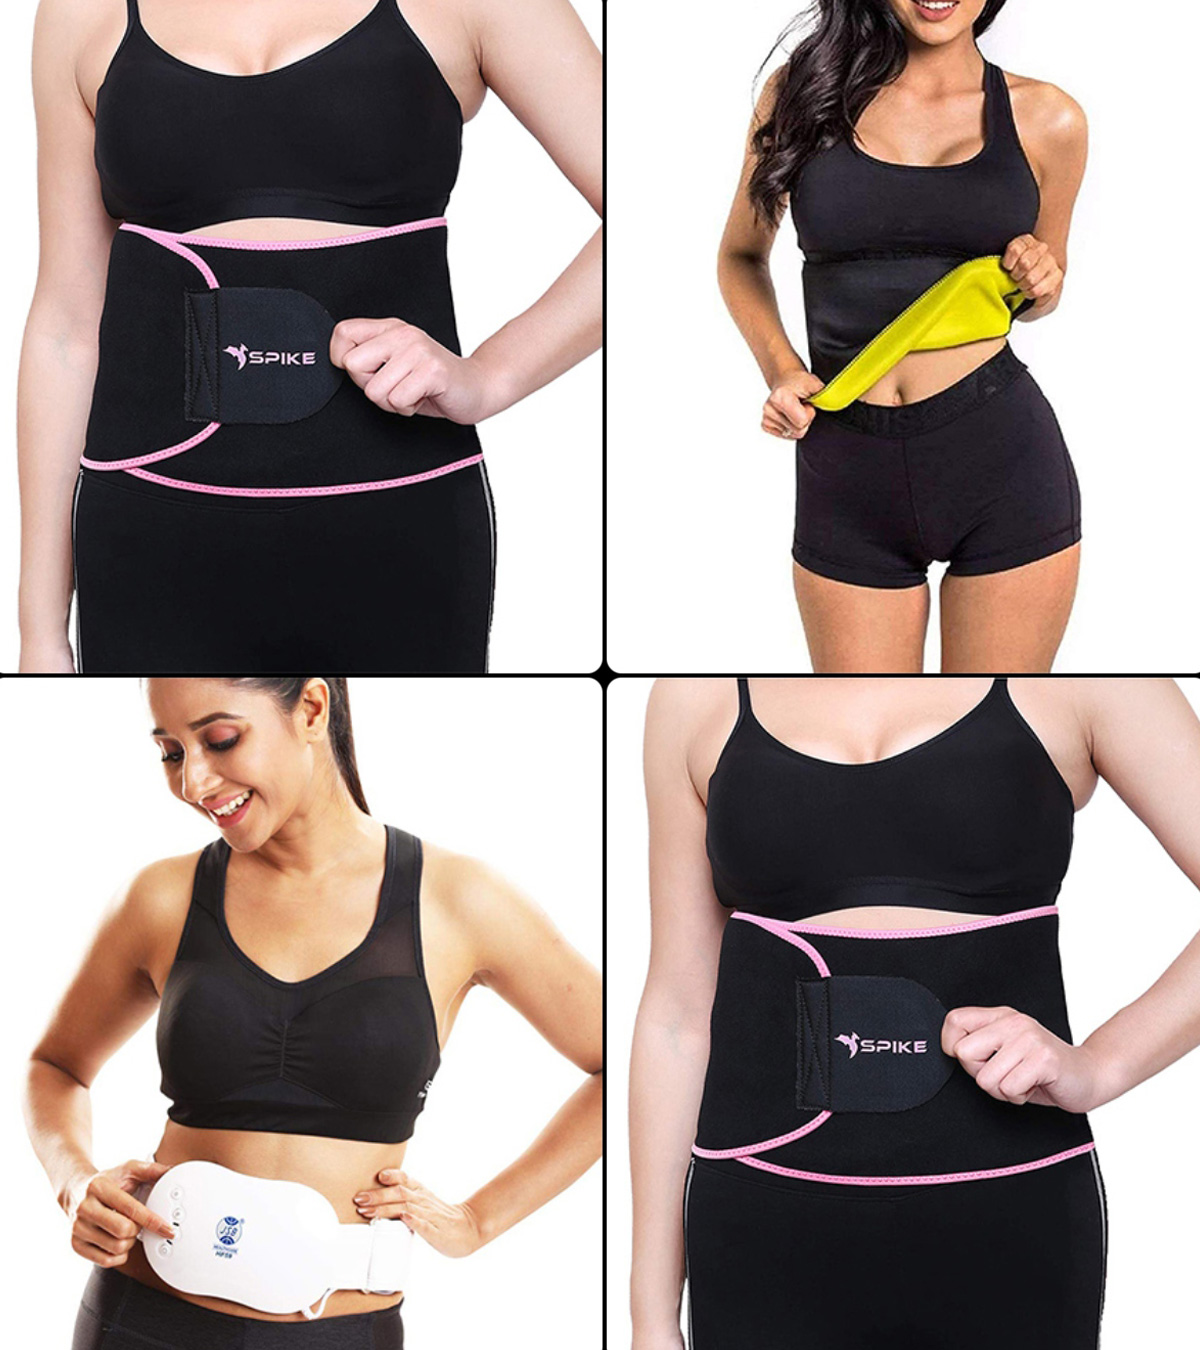 Belly Burner Weight Loss Belt Black One Size Fits All Up To 50-Inches for sale online 